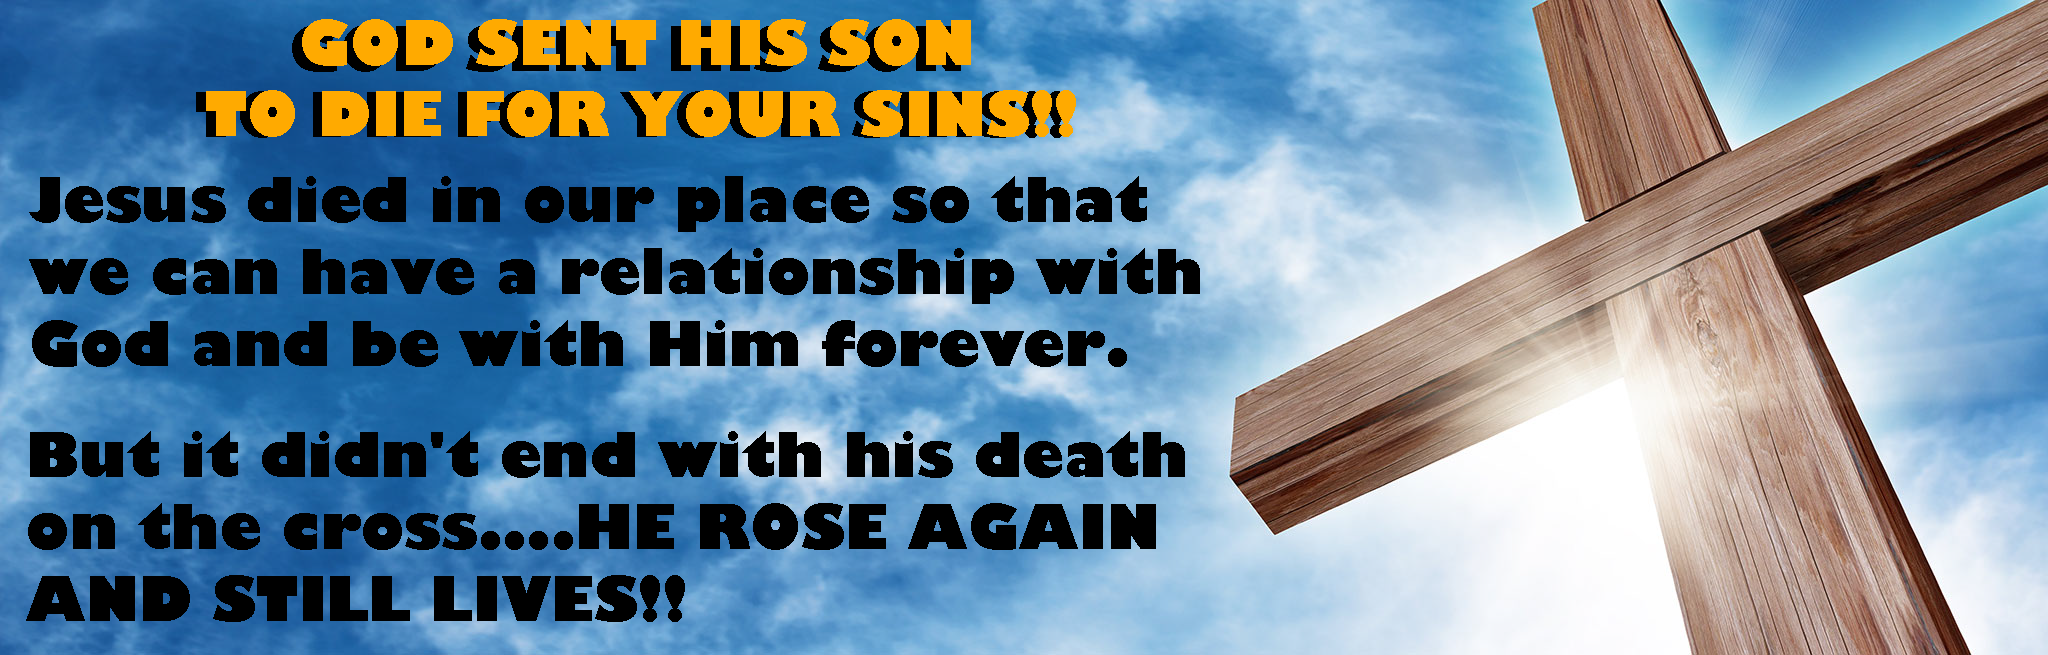 God sent his son Christ to die for your sins